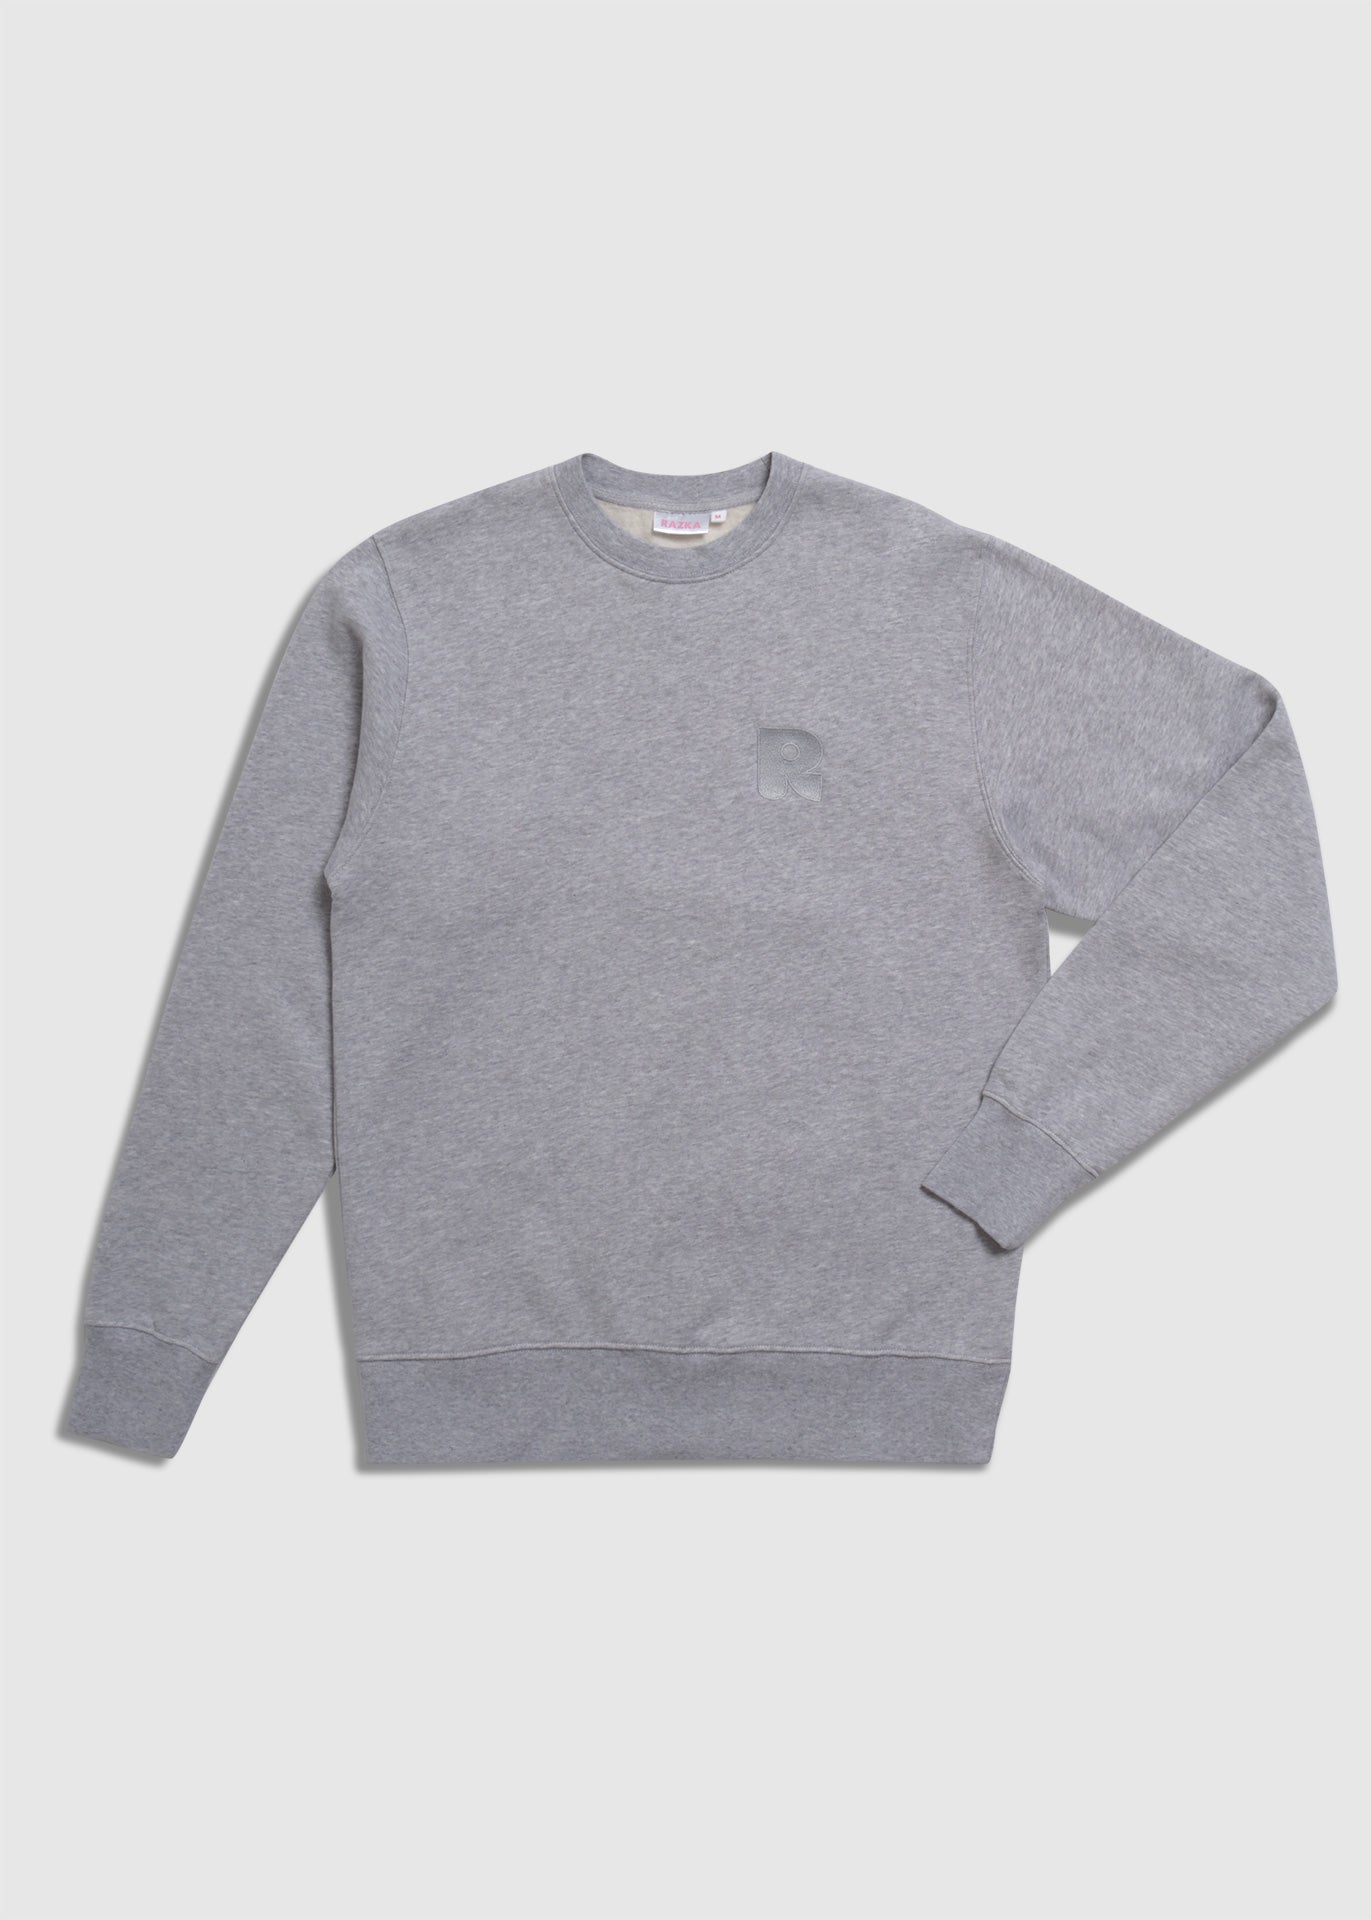 The Gray sweater